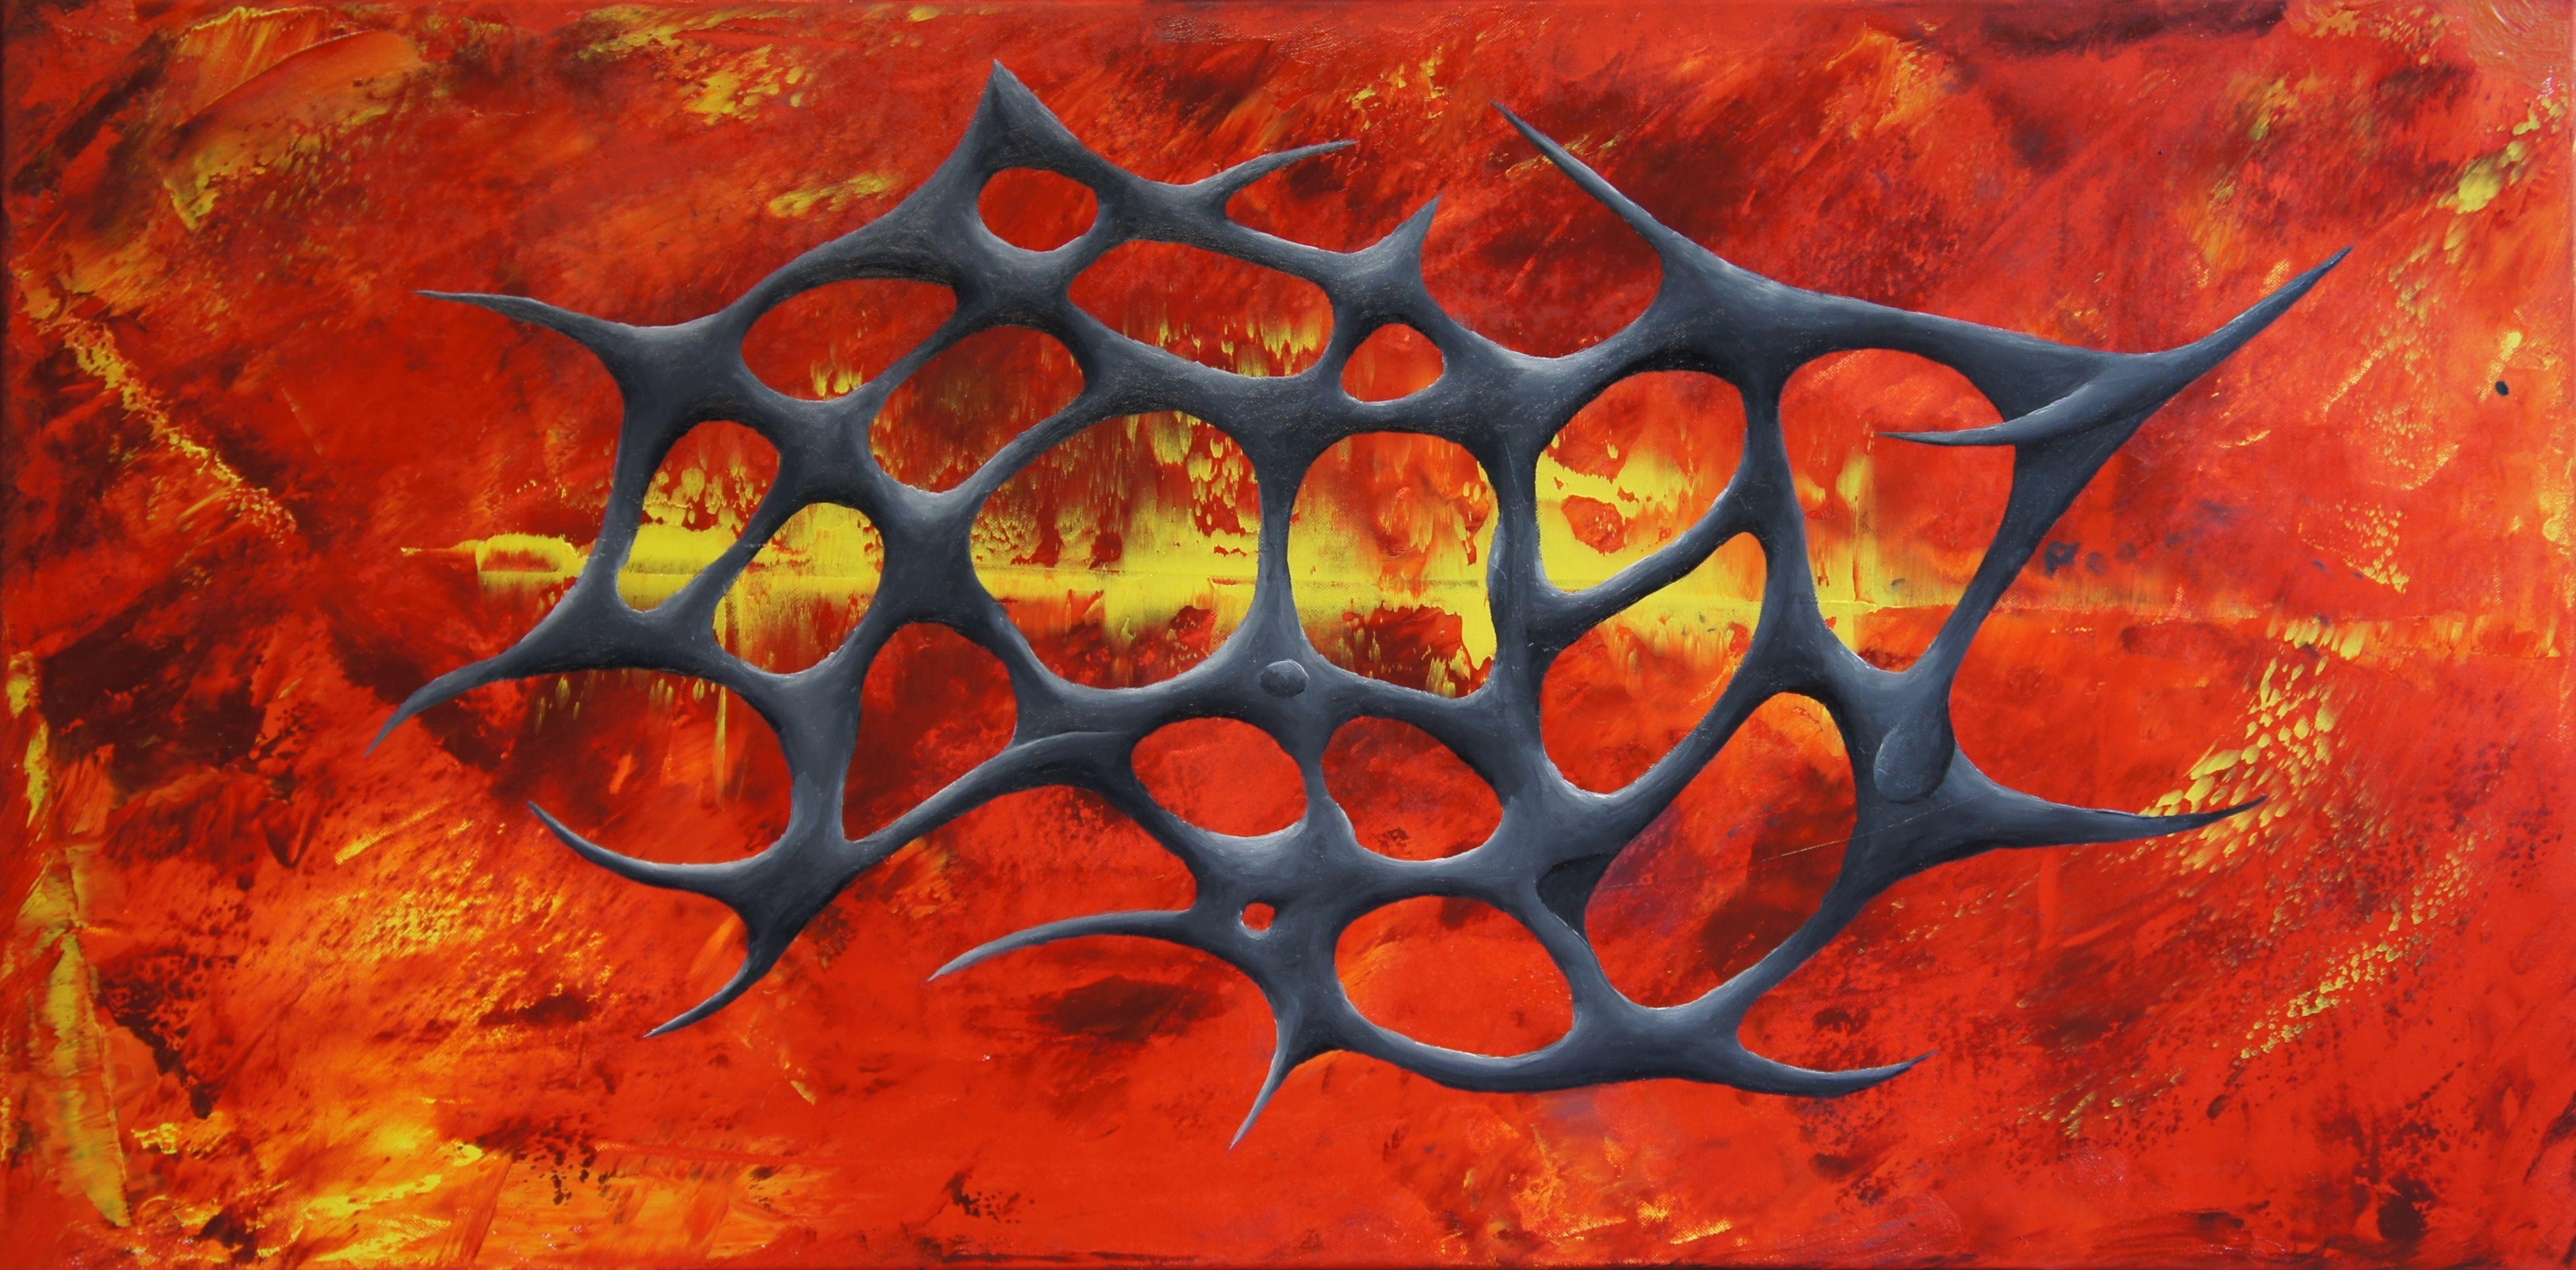 Ansgar Dressler Abstract Painting - Vulcano Forged (100 x 50 cm) XL oil (40 x 20 inche, Painting, Oil on Canvas